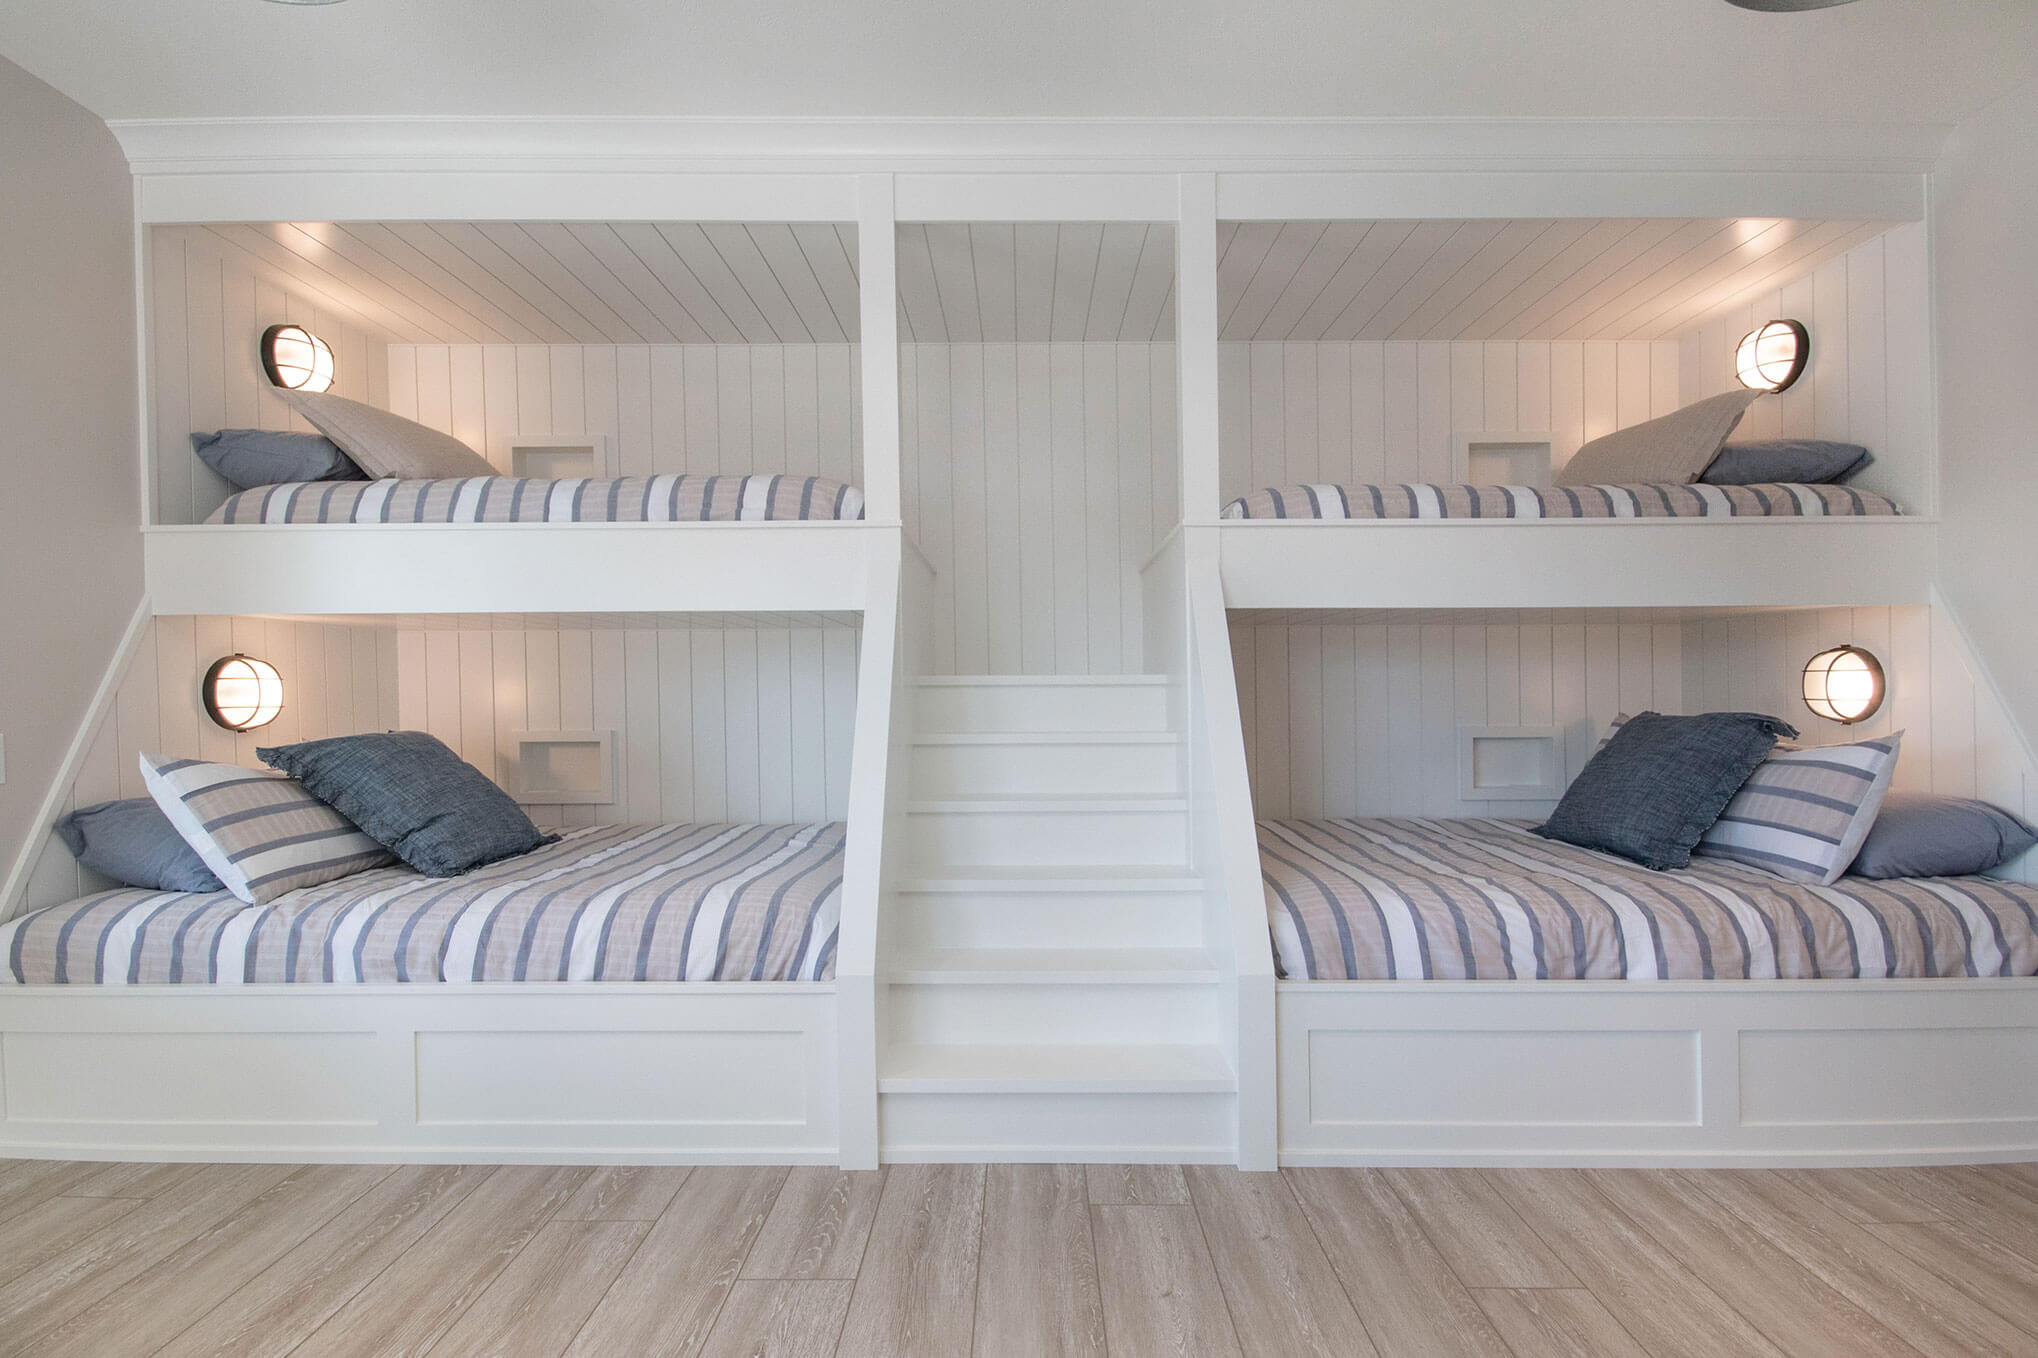 25 Bunk Bed Ideas For Small Bedrooms, 4 Way Bunk Beds